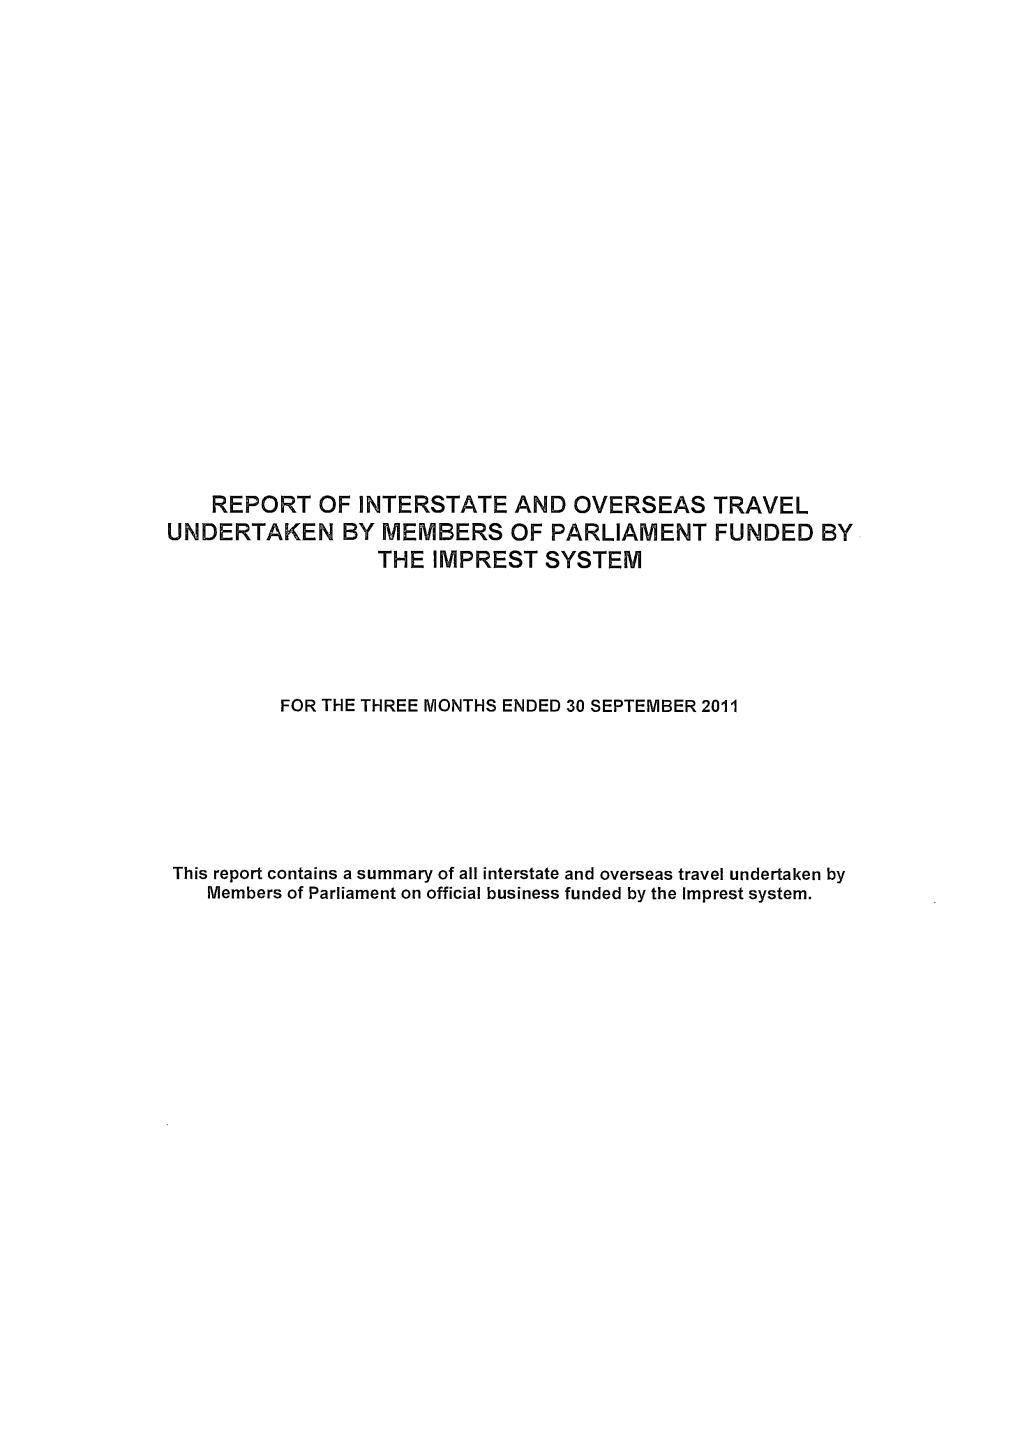 Report of Interstate and Overseas Travel Undertaken by Members of Parliament Funded by the Imprest System